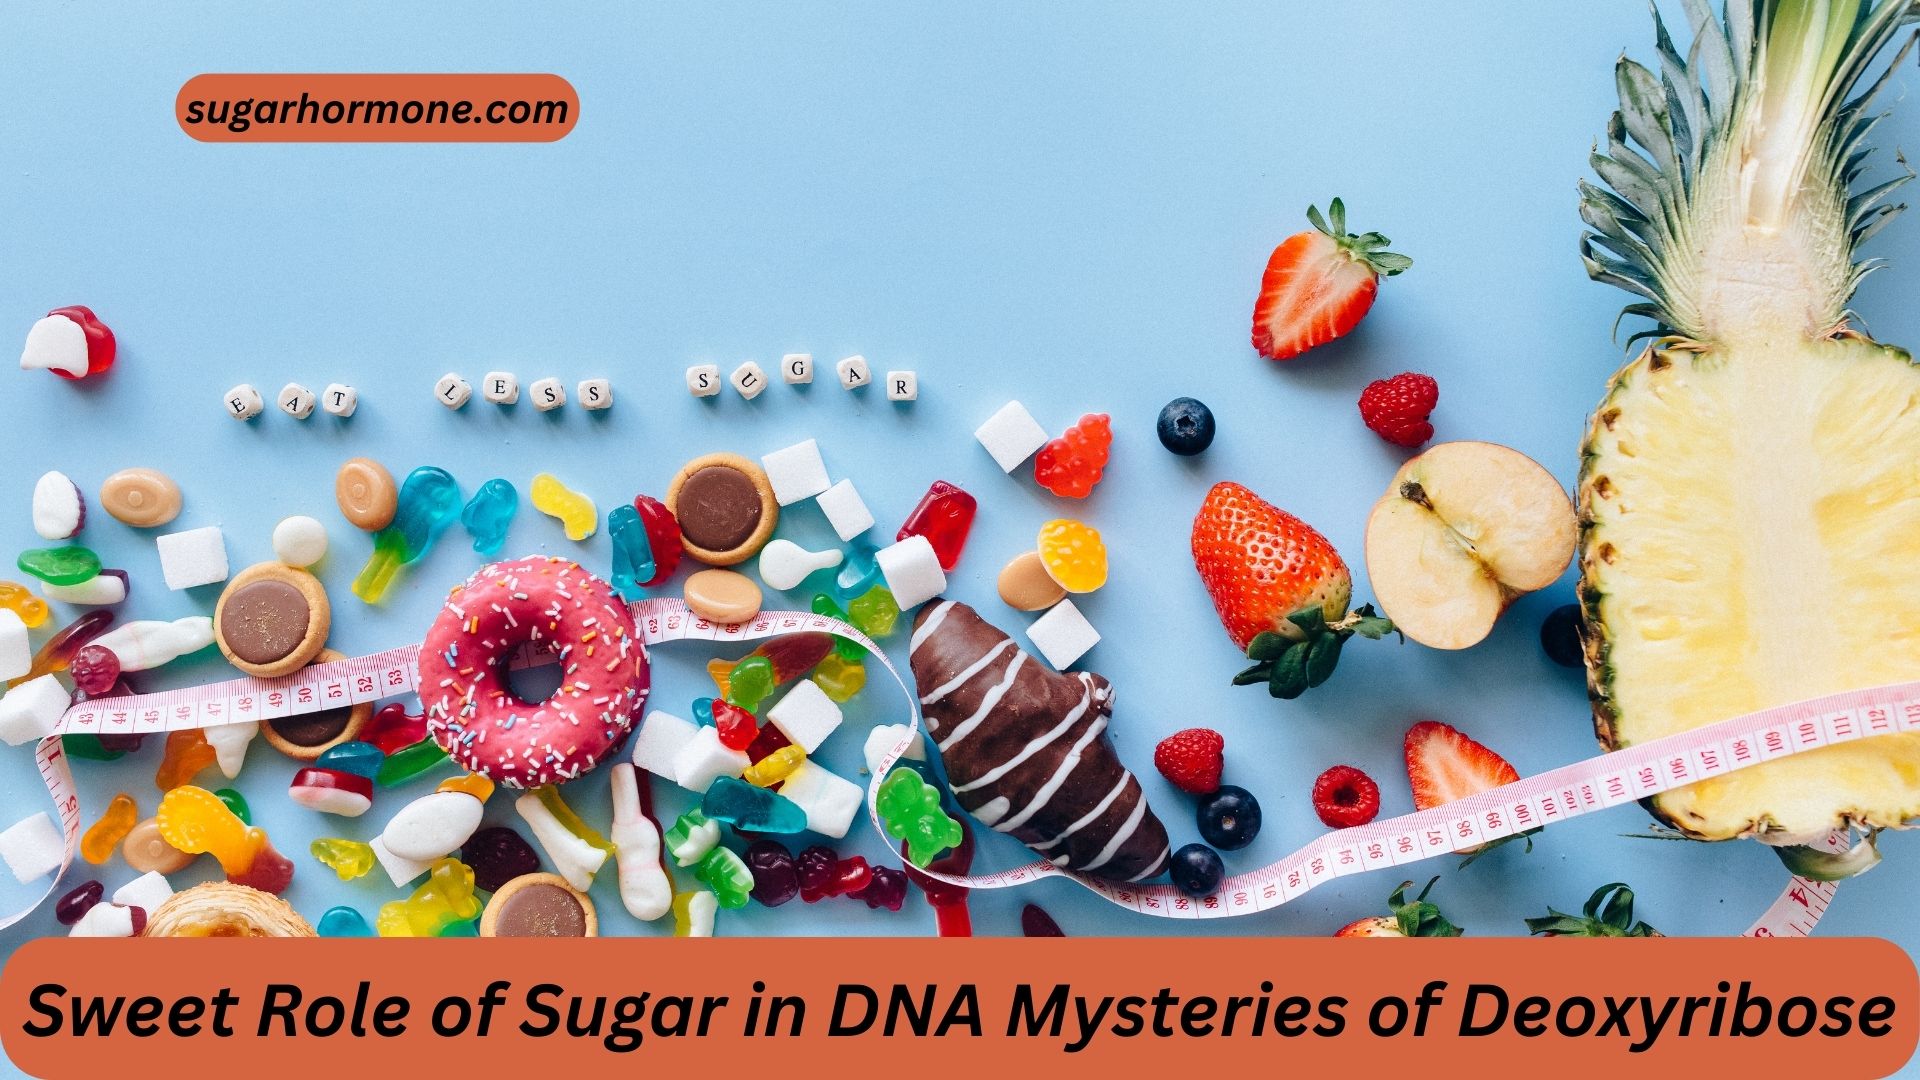 Sweet Role of Sugar in DNA Mysteries of Deoxyribose